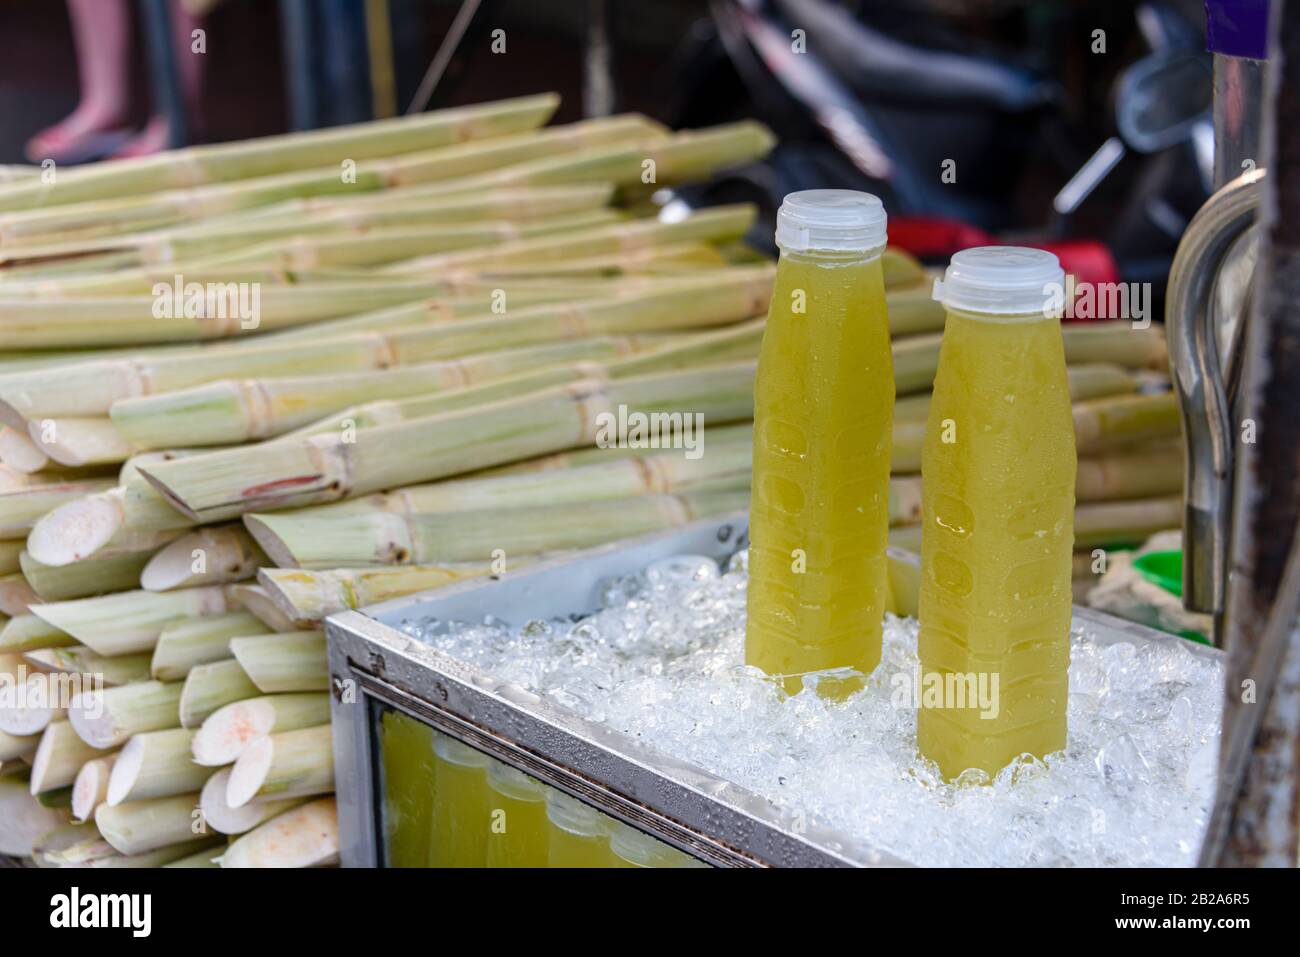 Plastic bottles on ice containing pulped sugar cane for sale on a street stall, Bangkok, Thailand Stock Photo